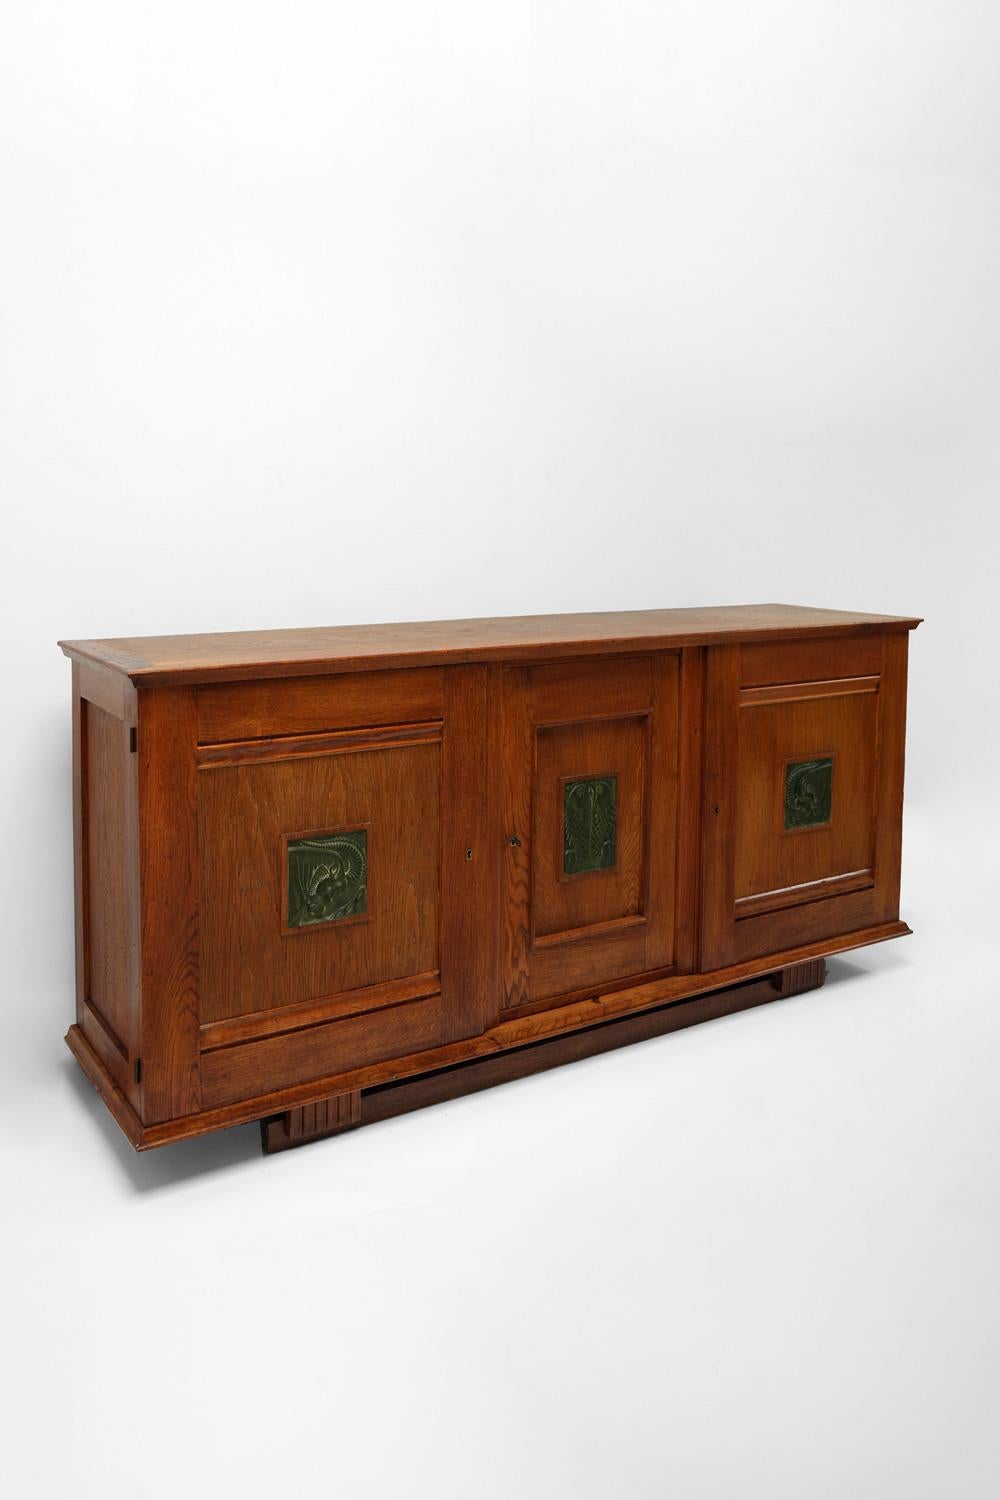 Limed oak sideboard opening with three front doors, each decorated with a blackened carved wooden tile with an animal motif France, 1940s.